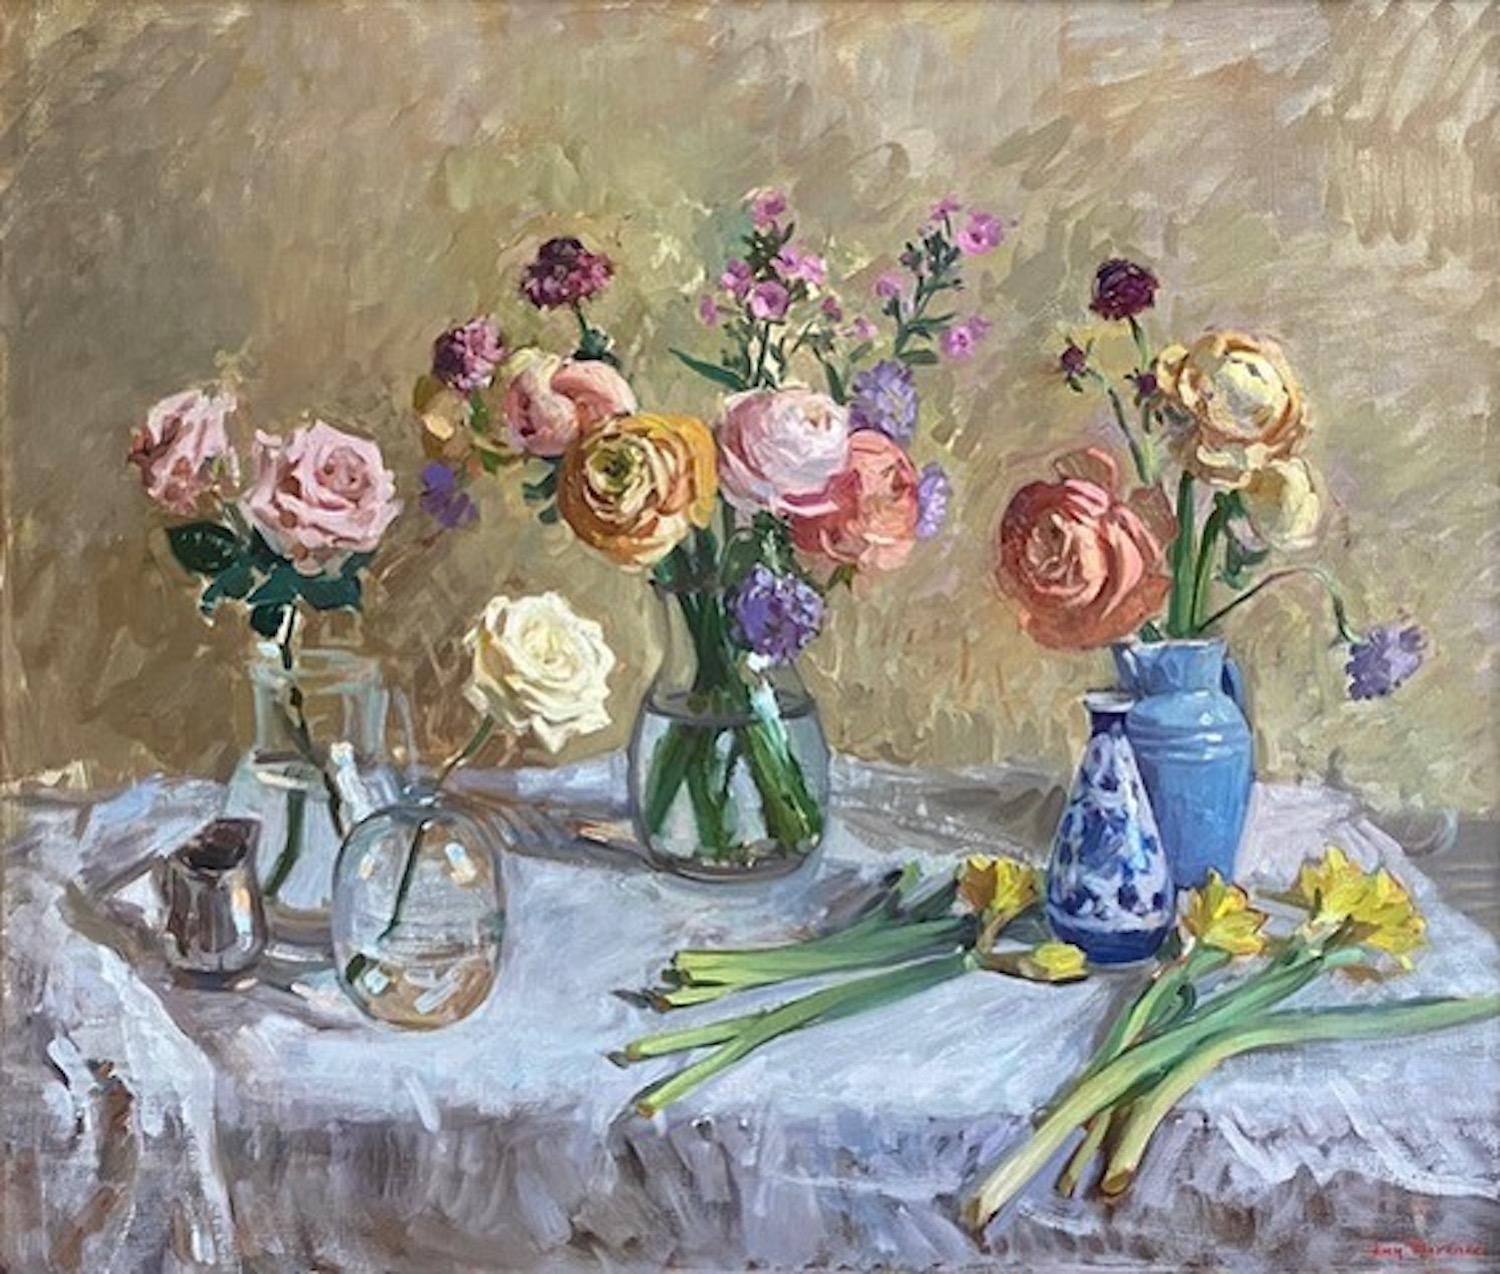 Amy Florence Interior Painting - "Ranunculus and Roses" bright contemporary impressionist flower still life